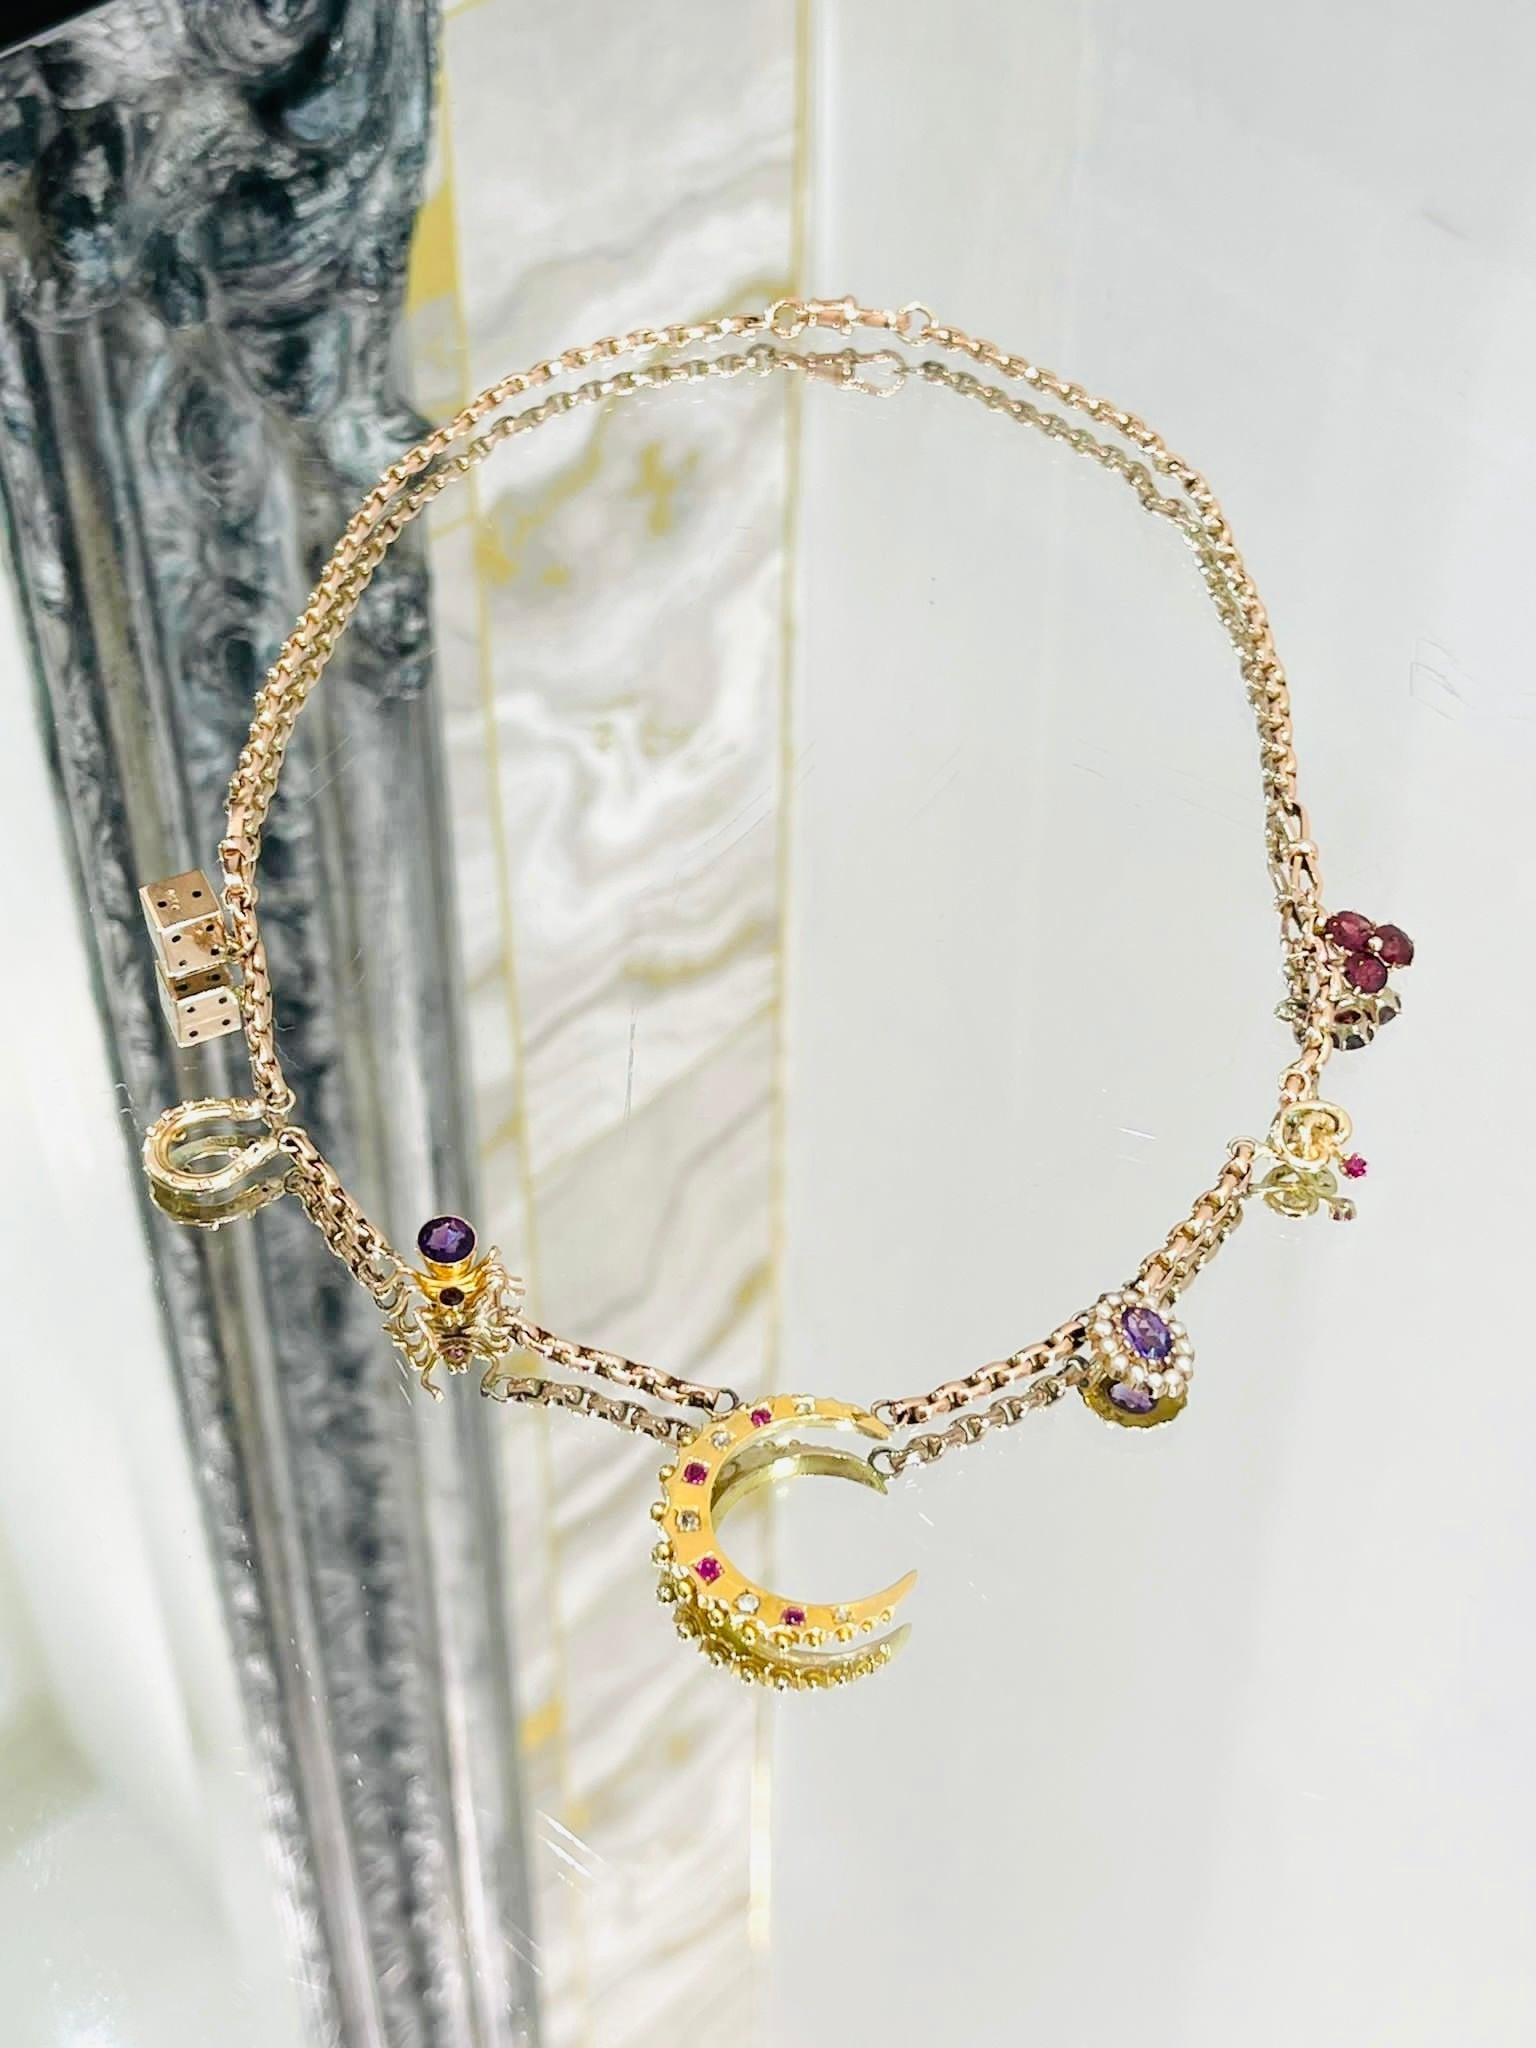 Victorian 15ct Rose Gold, Diamond, Ruby, Amethyst Charm Necklace

Victorian longguard in a mix of 15ct and 9ct gold, pocket watch chain with original clasp, converted into a charm necklace. Charms consisting of:

- Crescent set with diamonds and